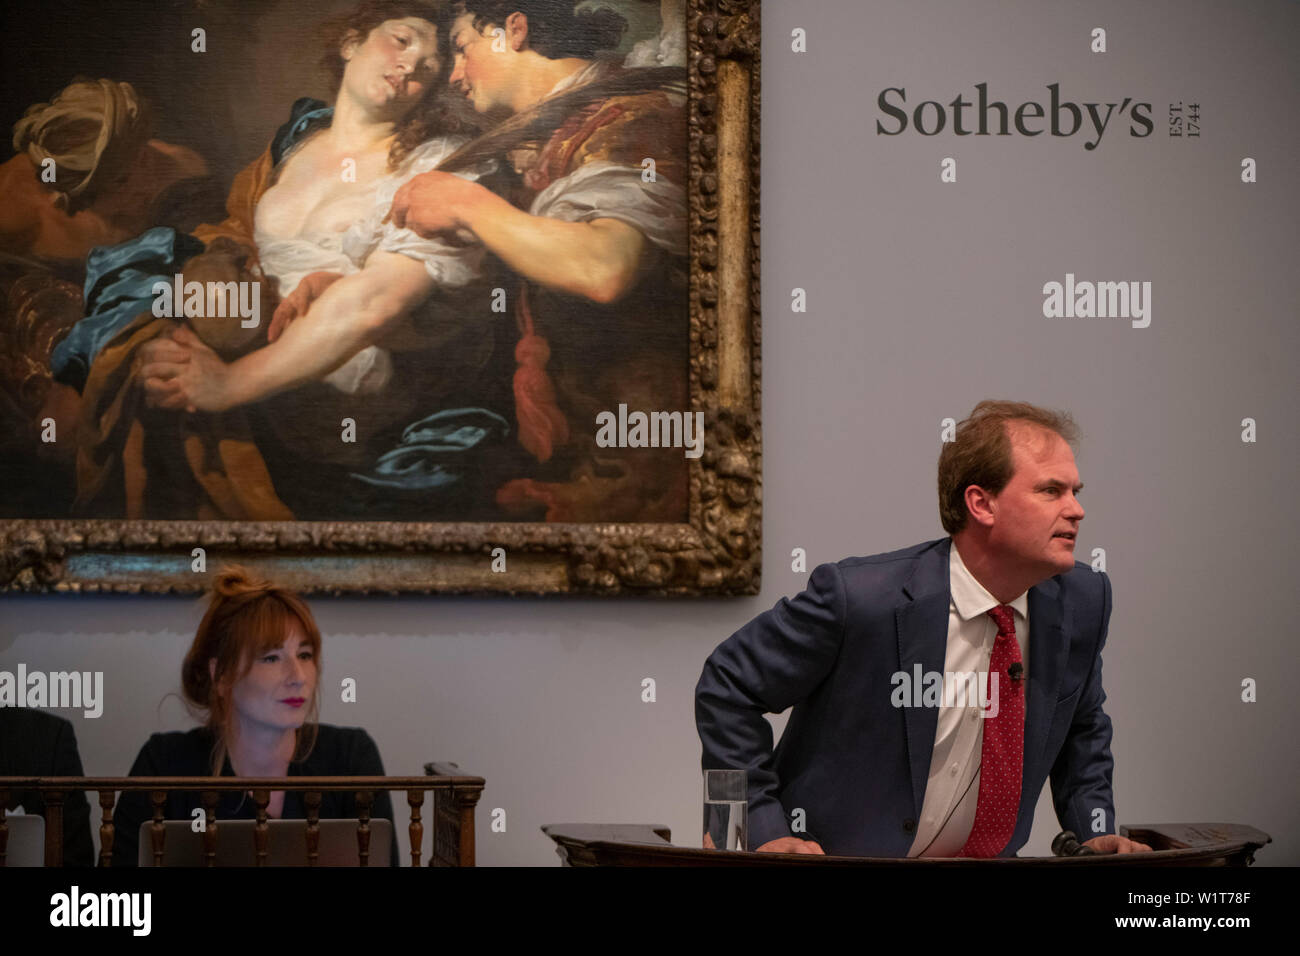 Sotheby’s, London, UK. 3rd July 2019. The summer Old Masters Evening sale offers paintings from the 14th - 19th century by many of the most important painters of Western art. Highlights include a masterpiece by each of Britain’s greatest landscape painters: Turner, Constable and Gainsborough, and extraordinary works from the Baroque including the exceptionally rare Johann Liss (photograph), The Temptation of Saint Mary Magdalene, which sells for £5,665,000. Sale total for the evening was £56,205,950 sterling, the auction taken by Harry Dalmeny (pictured). Credit: Malcolm Park/Alamy Live News. Stock Photo